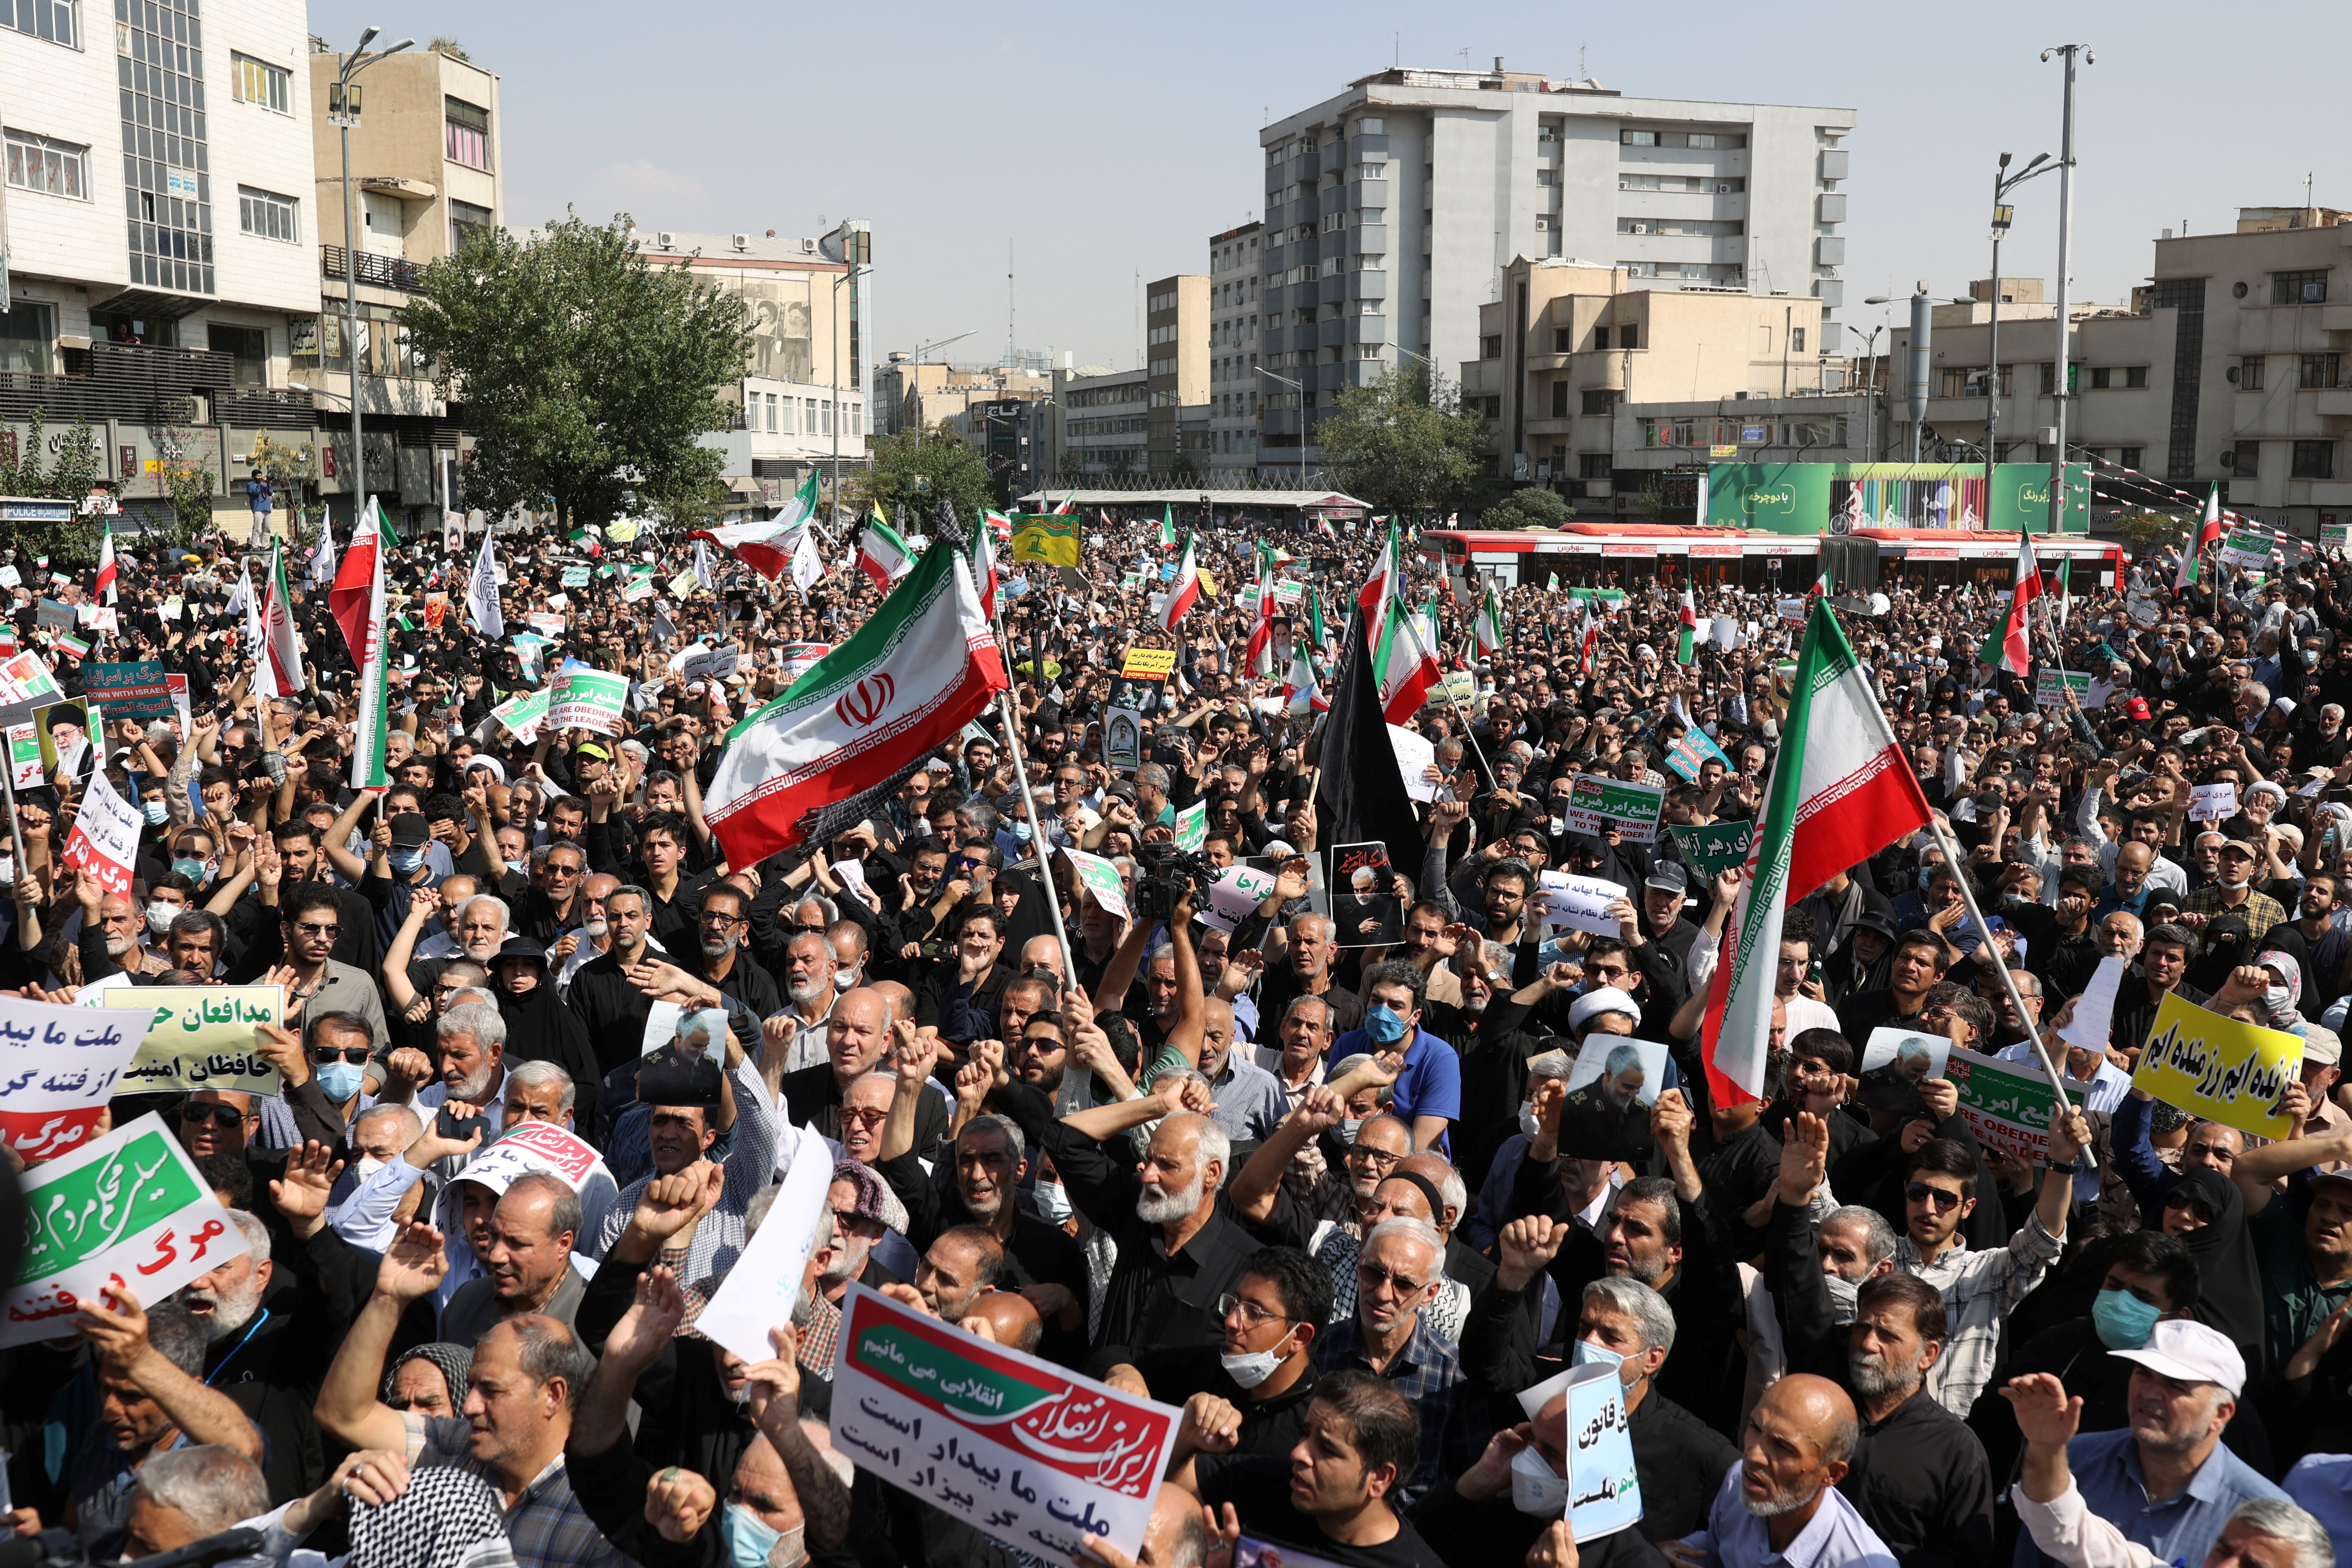 Pro-government peoples rally against the recent protest gatherings in Iran, after the Friday prayer ceremony in Tehran